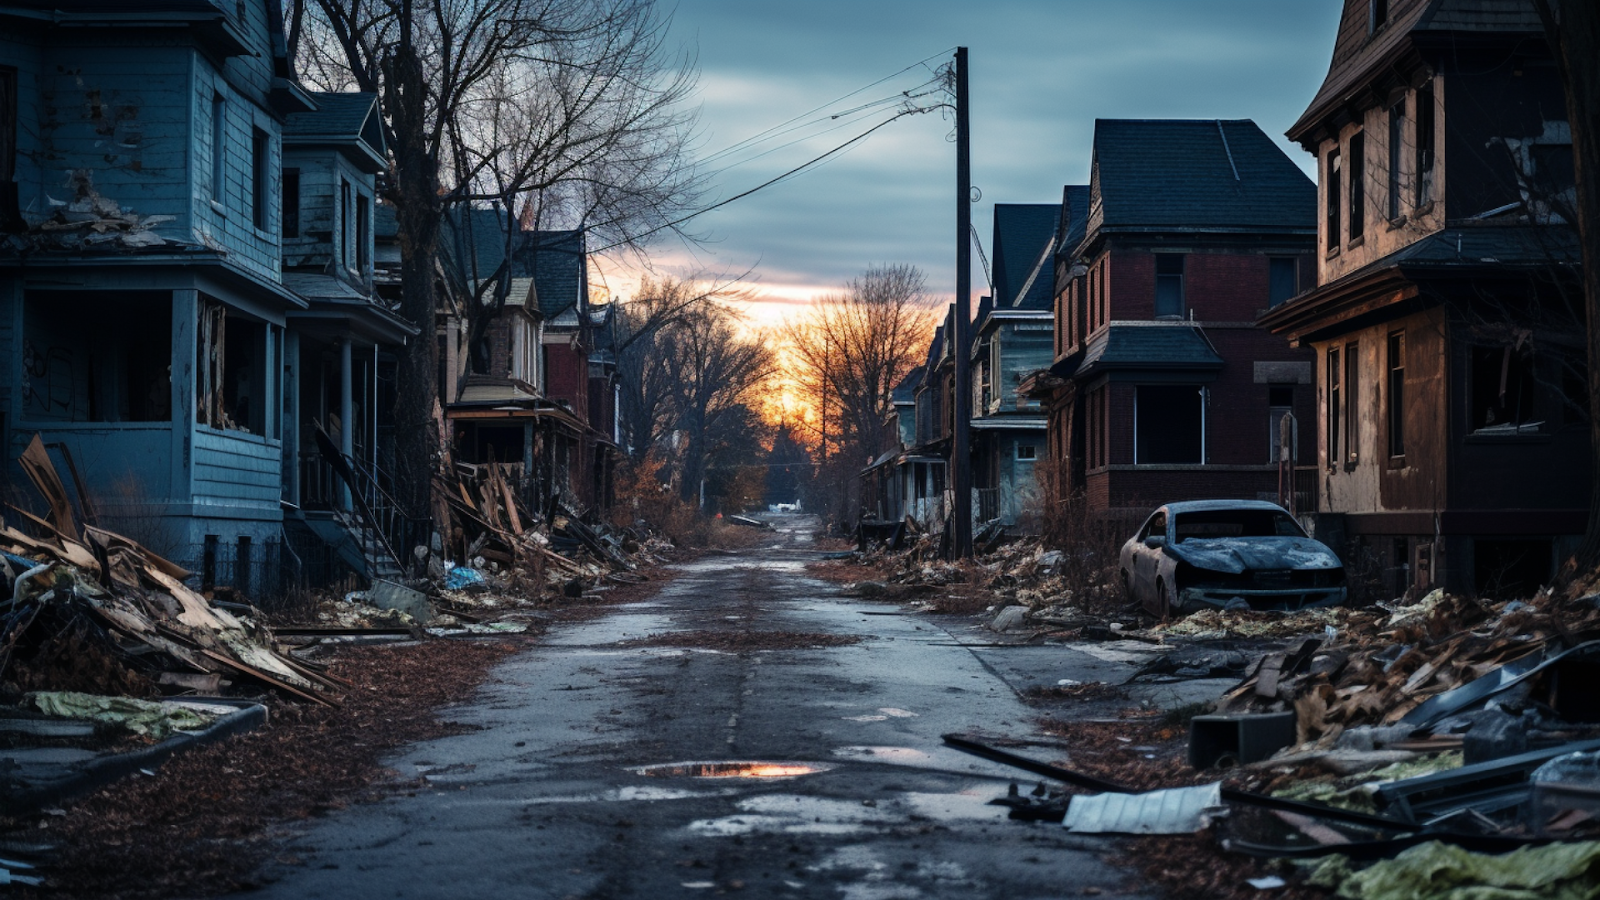 A desolate street in Highland Park, Michigan, illustrating the decline that ranks it among the worst cities to live in the USA.